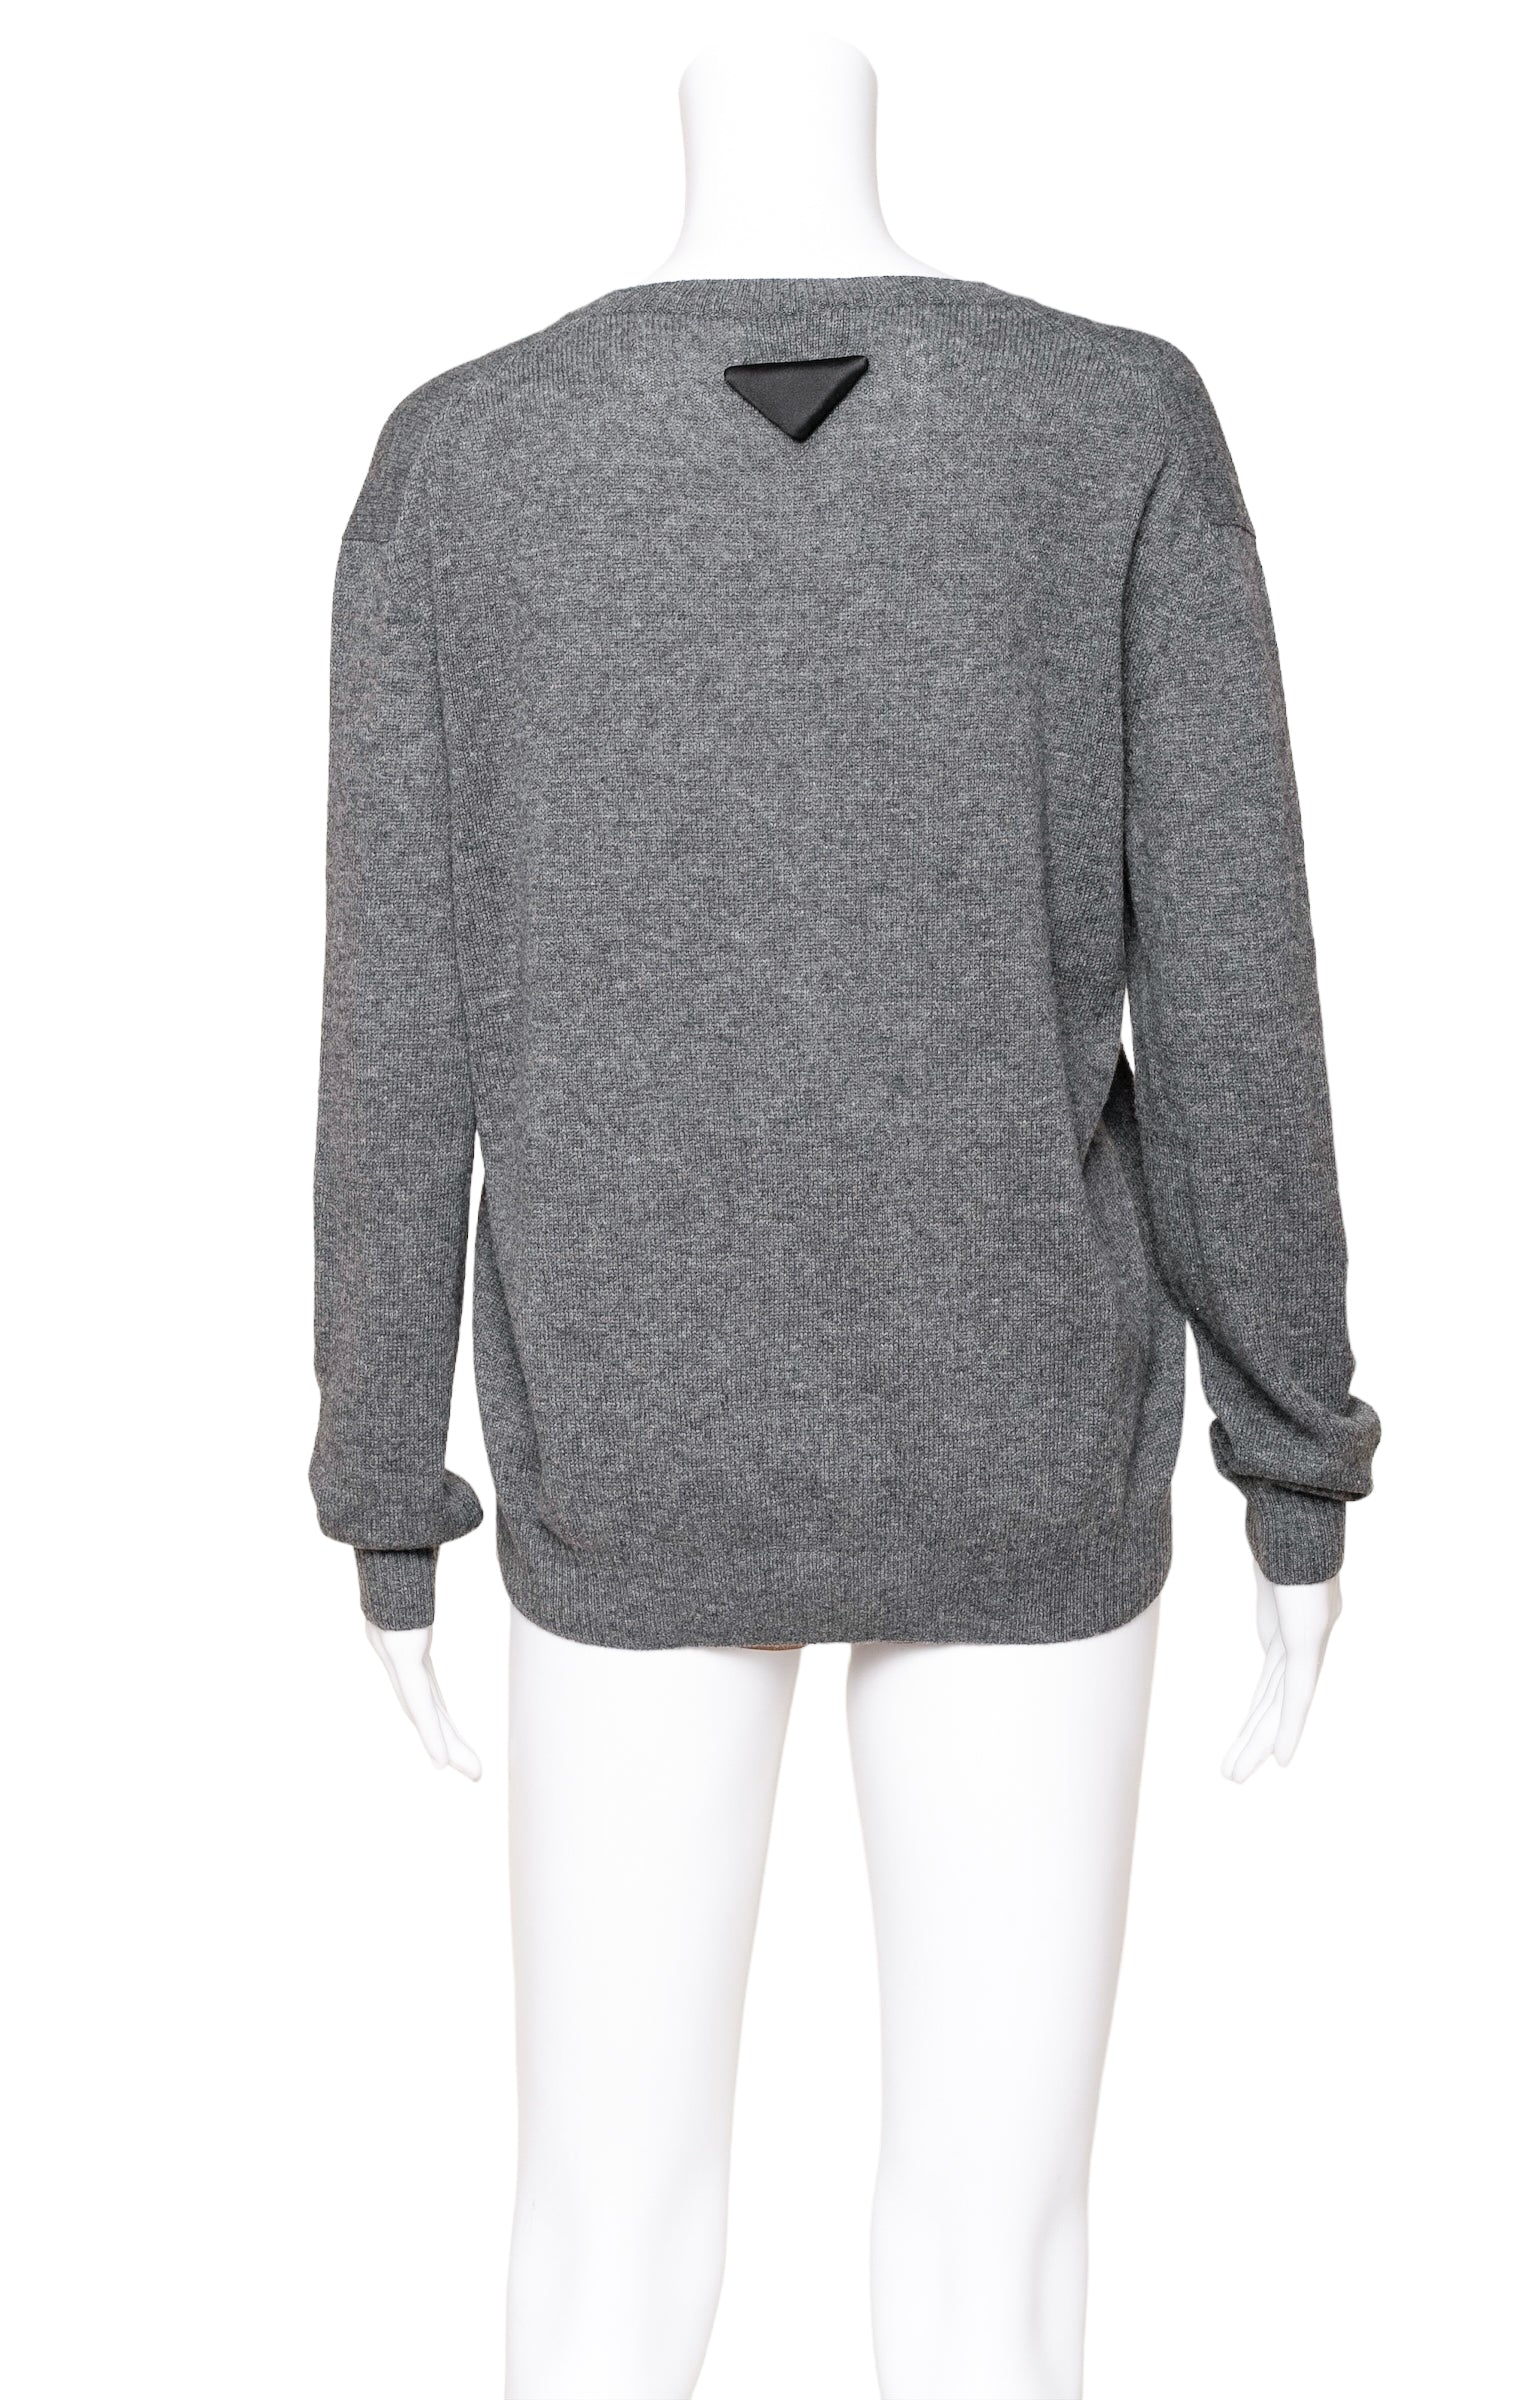 PRADA Sweater Size: IT 40 / Comparable to US 2-4